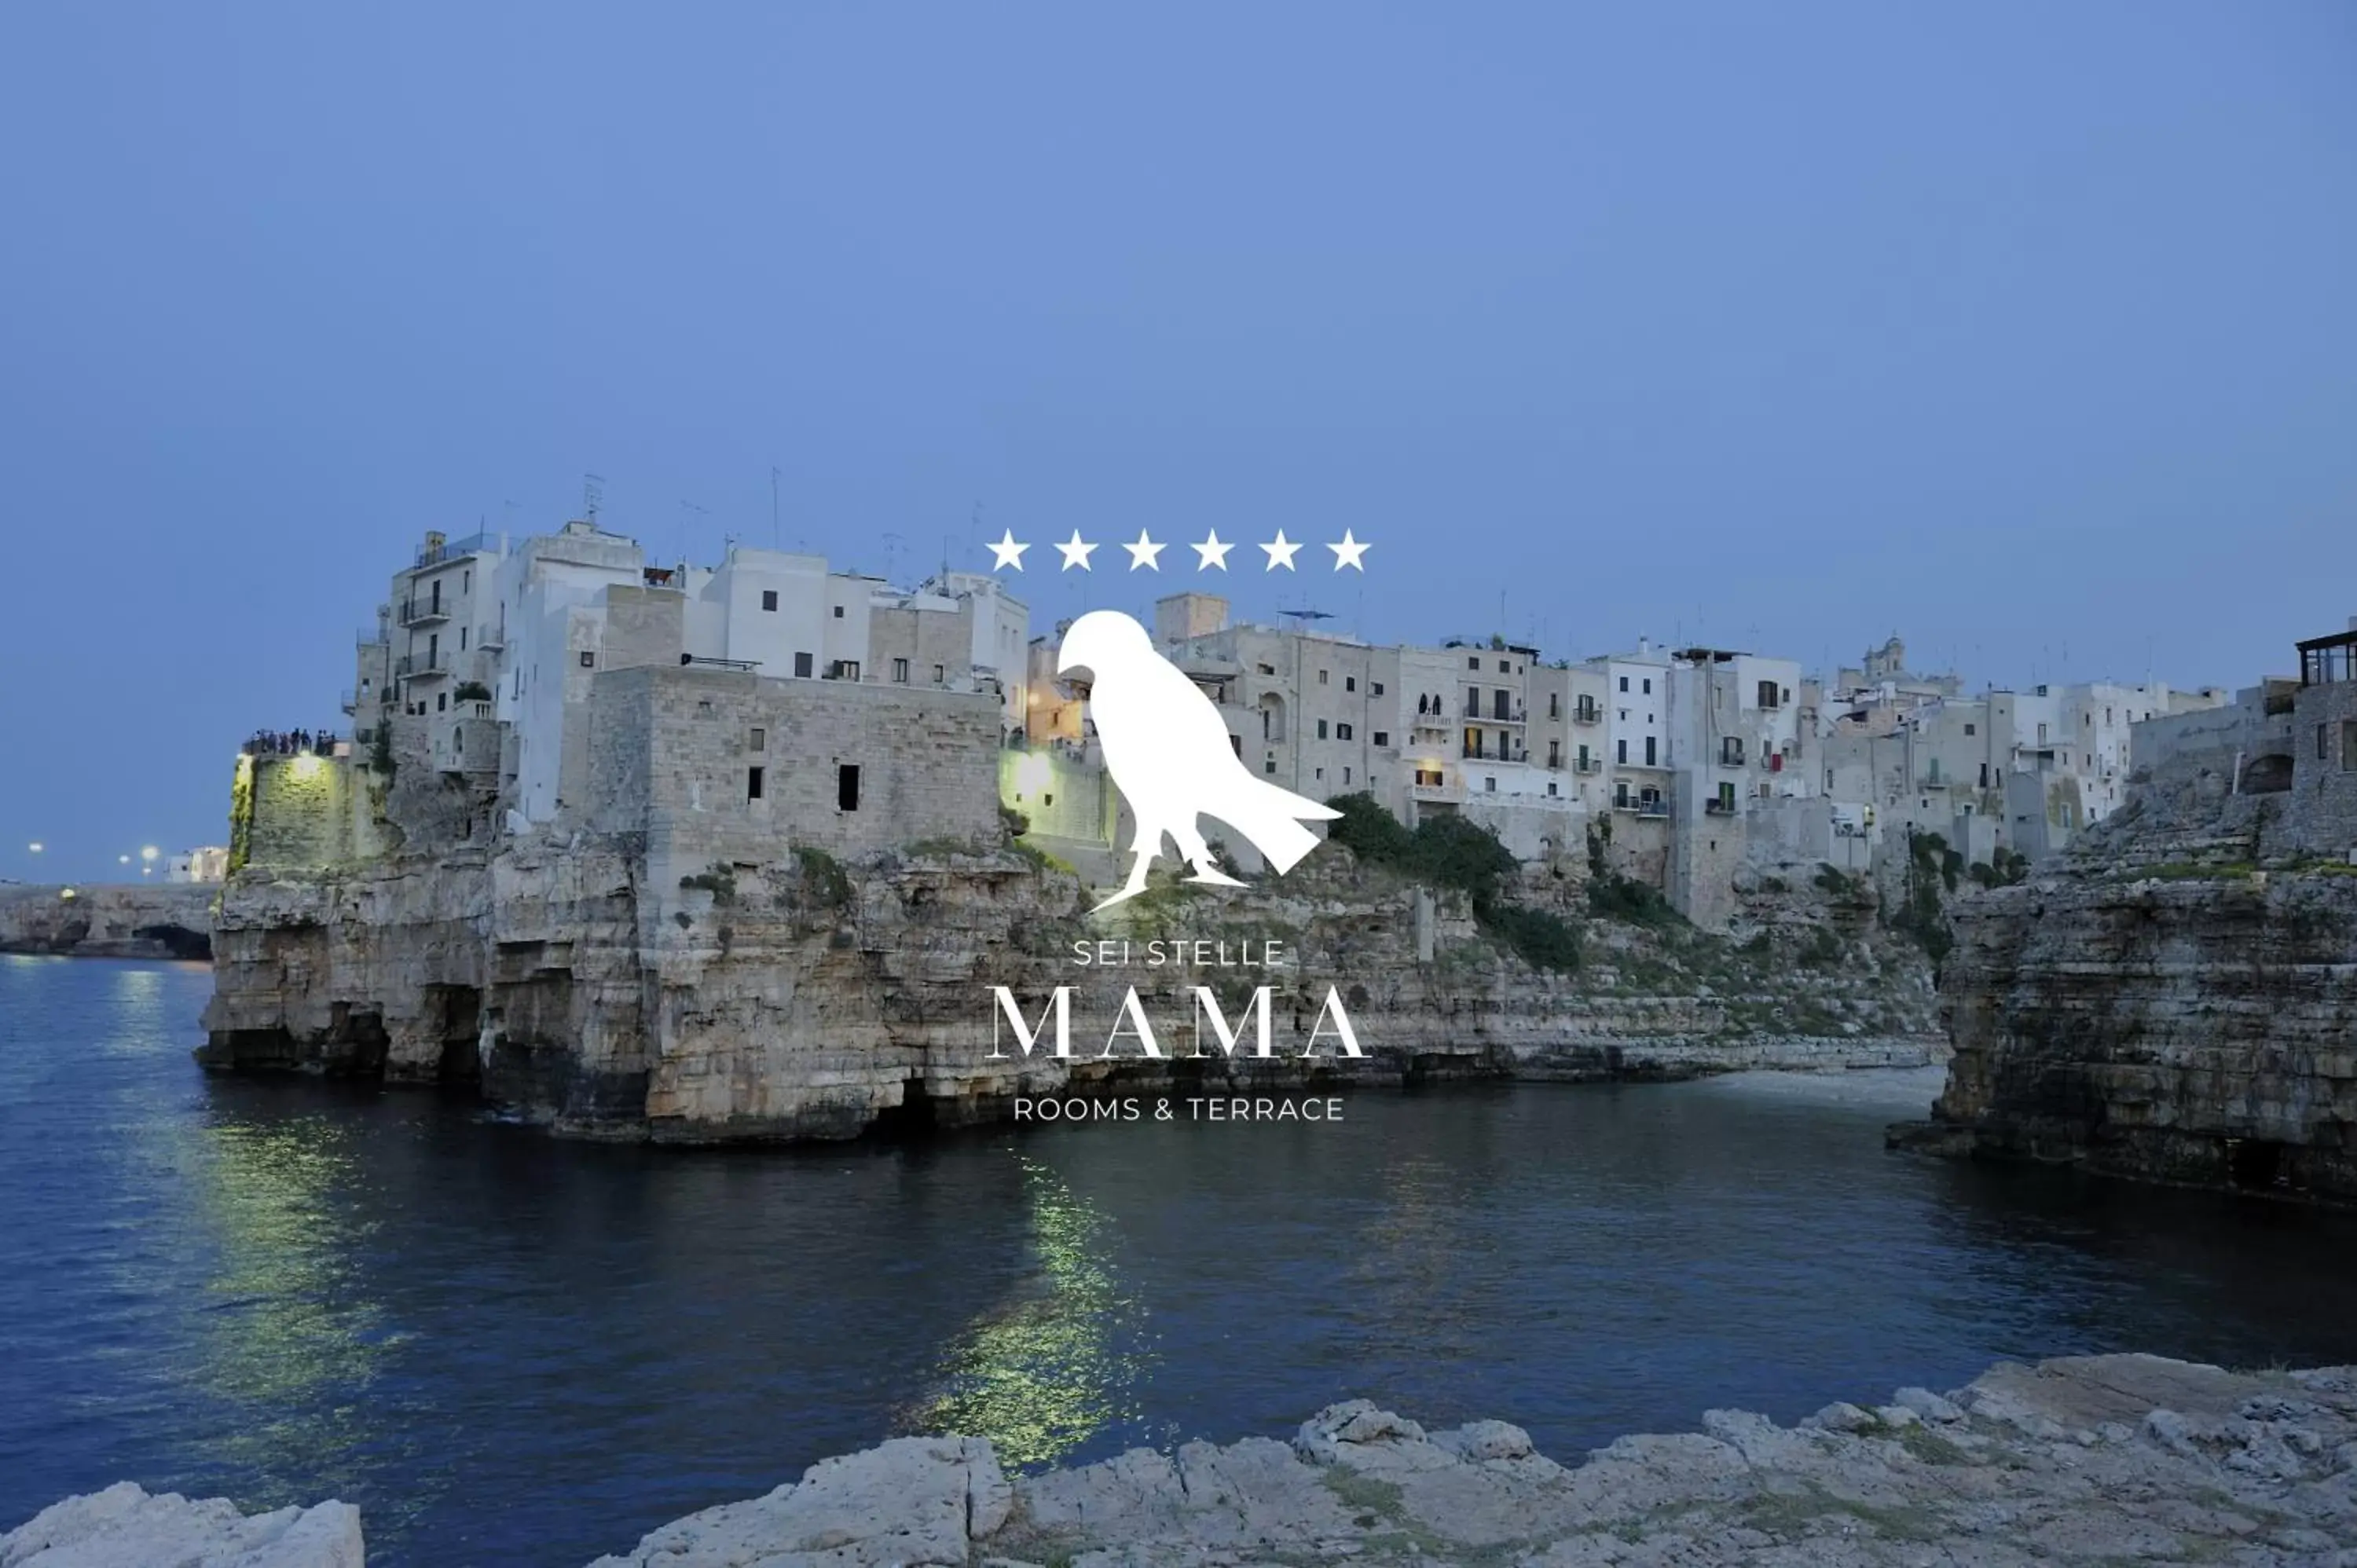 Property logo or sign in Sei Stelle Mama